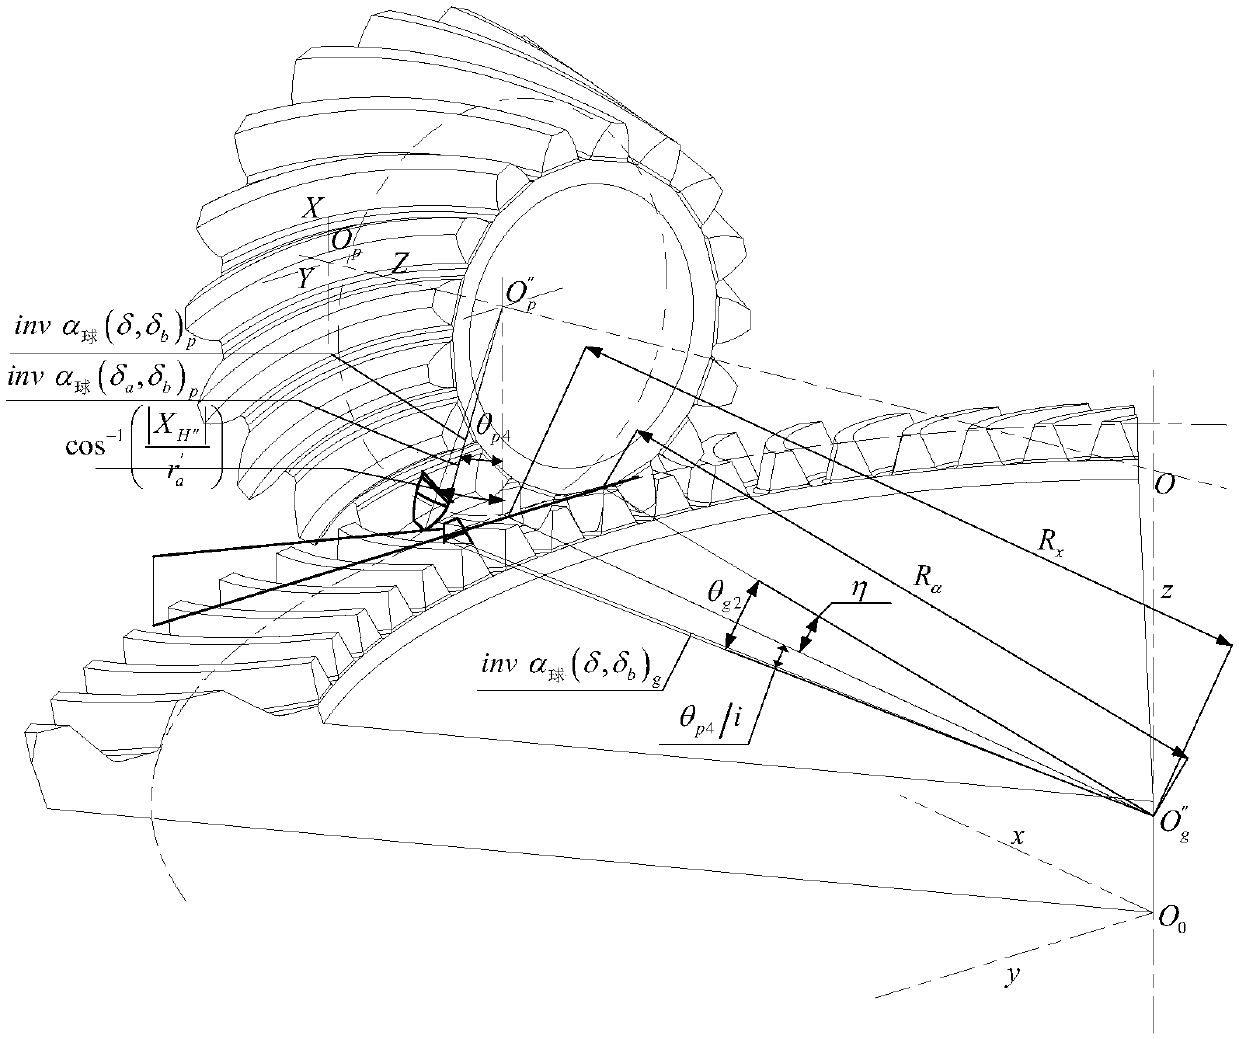 A method for optimizing the layout of oil injection lubrication nozzles ofa helical bevel gear for an aerospace